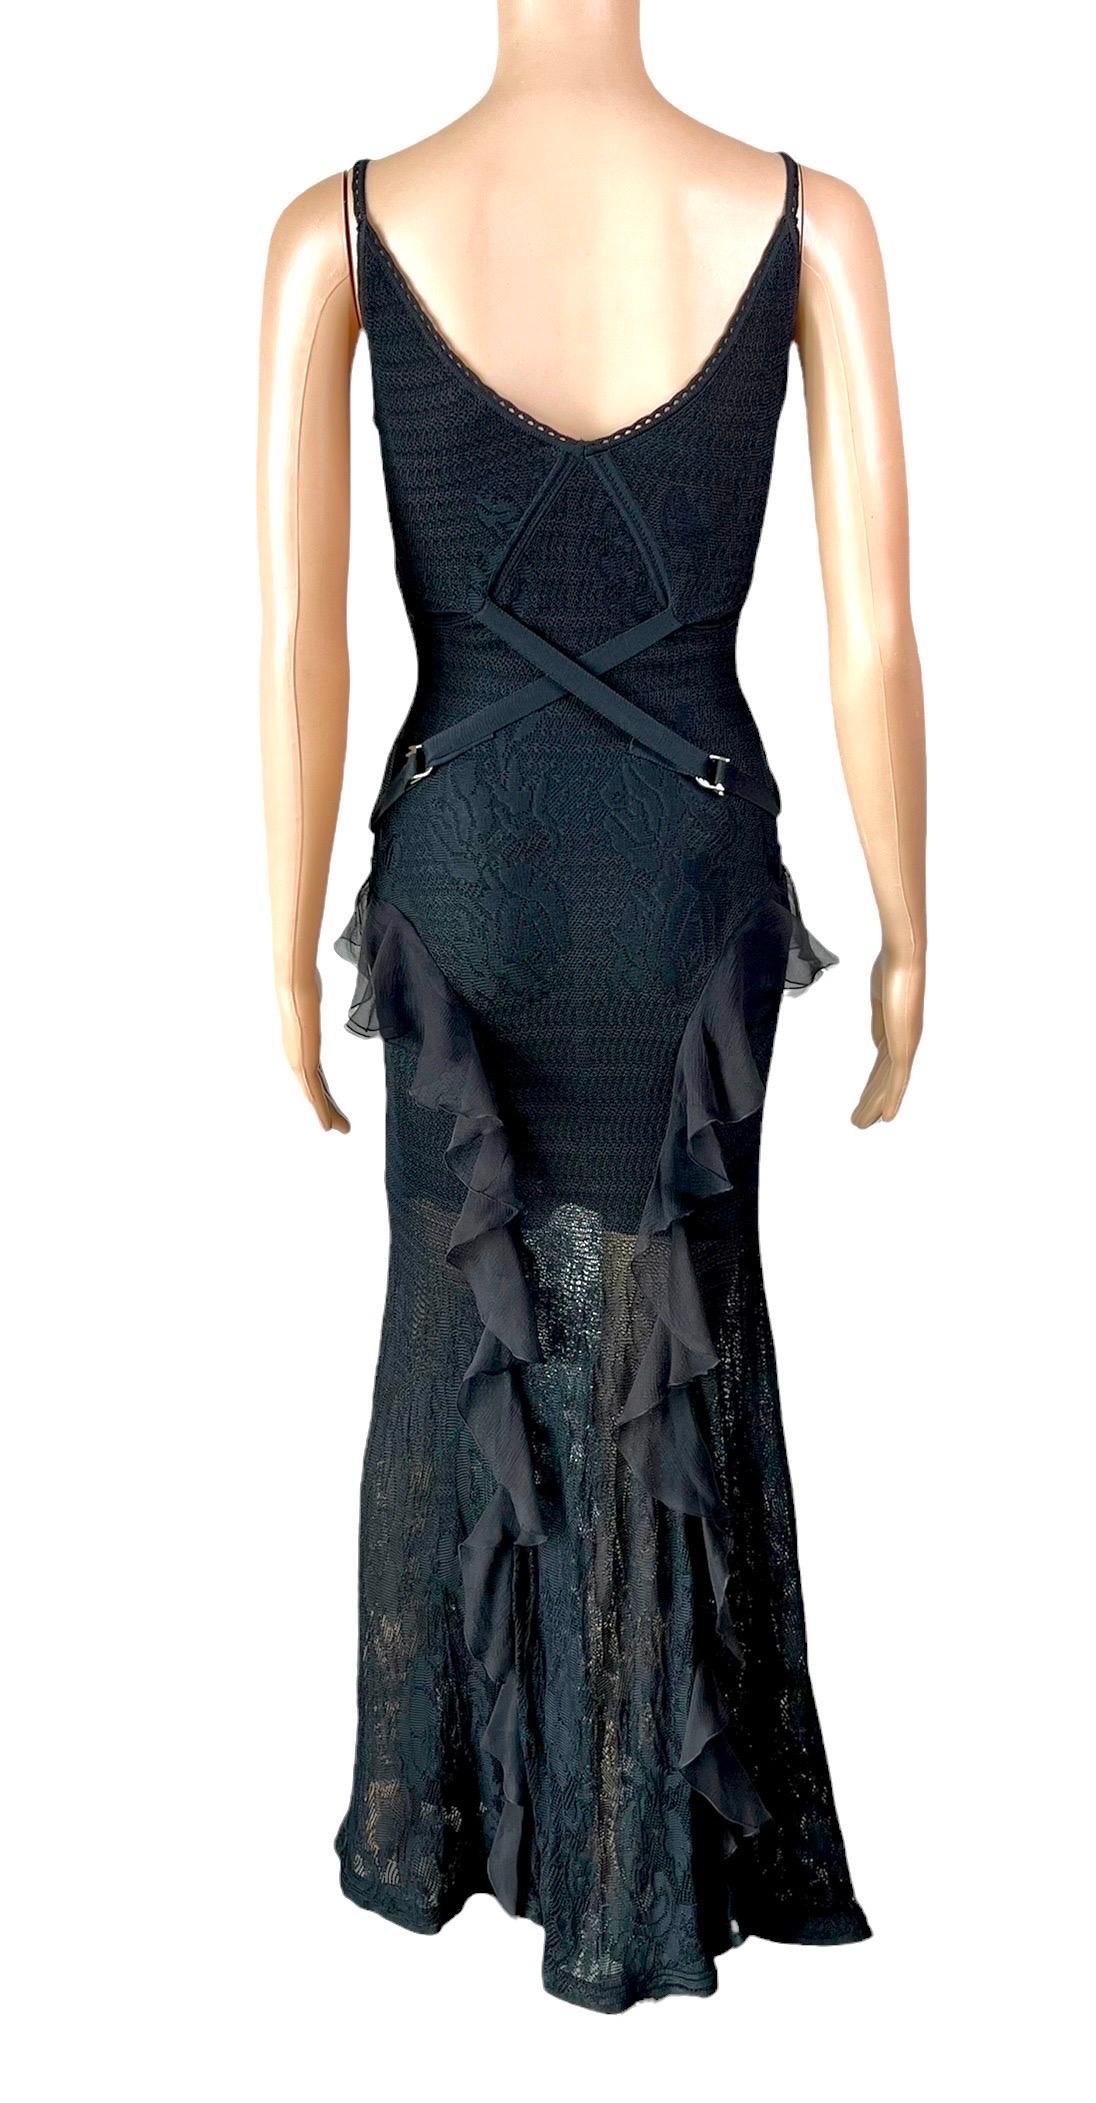 Christian Dior by John Galliano S/S2003 Sheer Lace Knit Black Evening Dress Gown For Sale 1